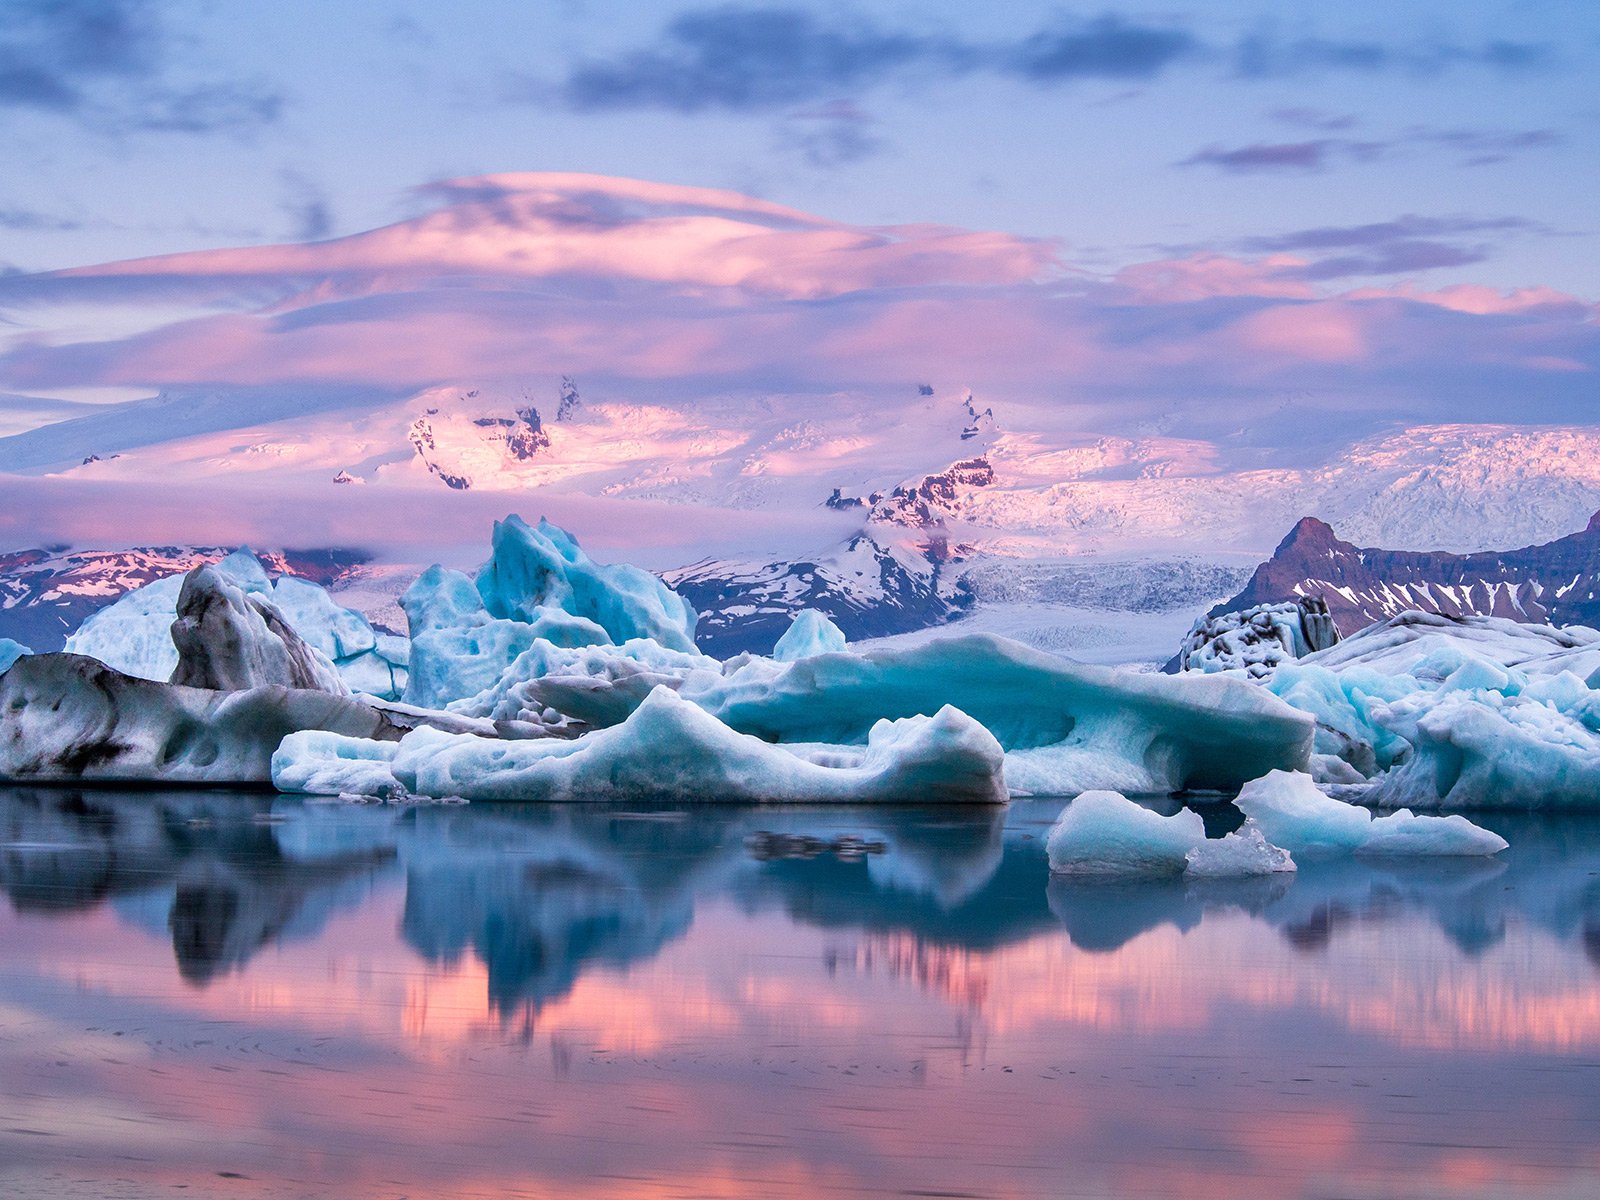 How to see a sunset over floating icebergs in Reykjavik